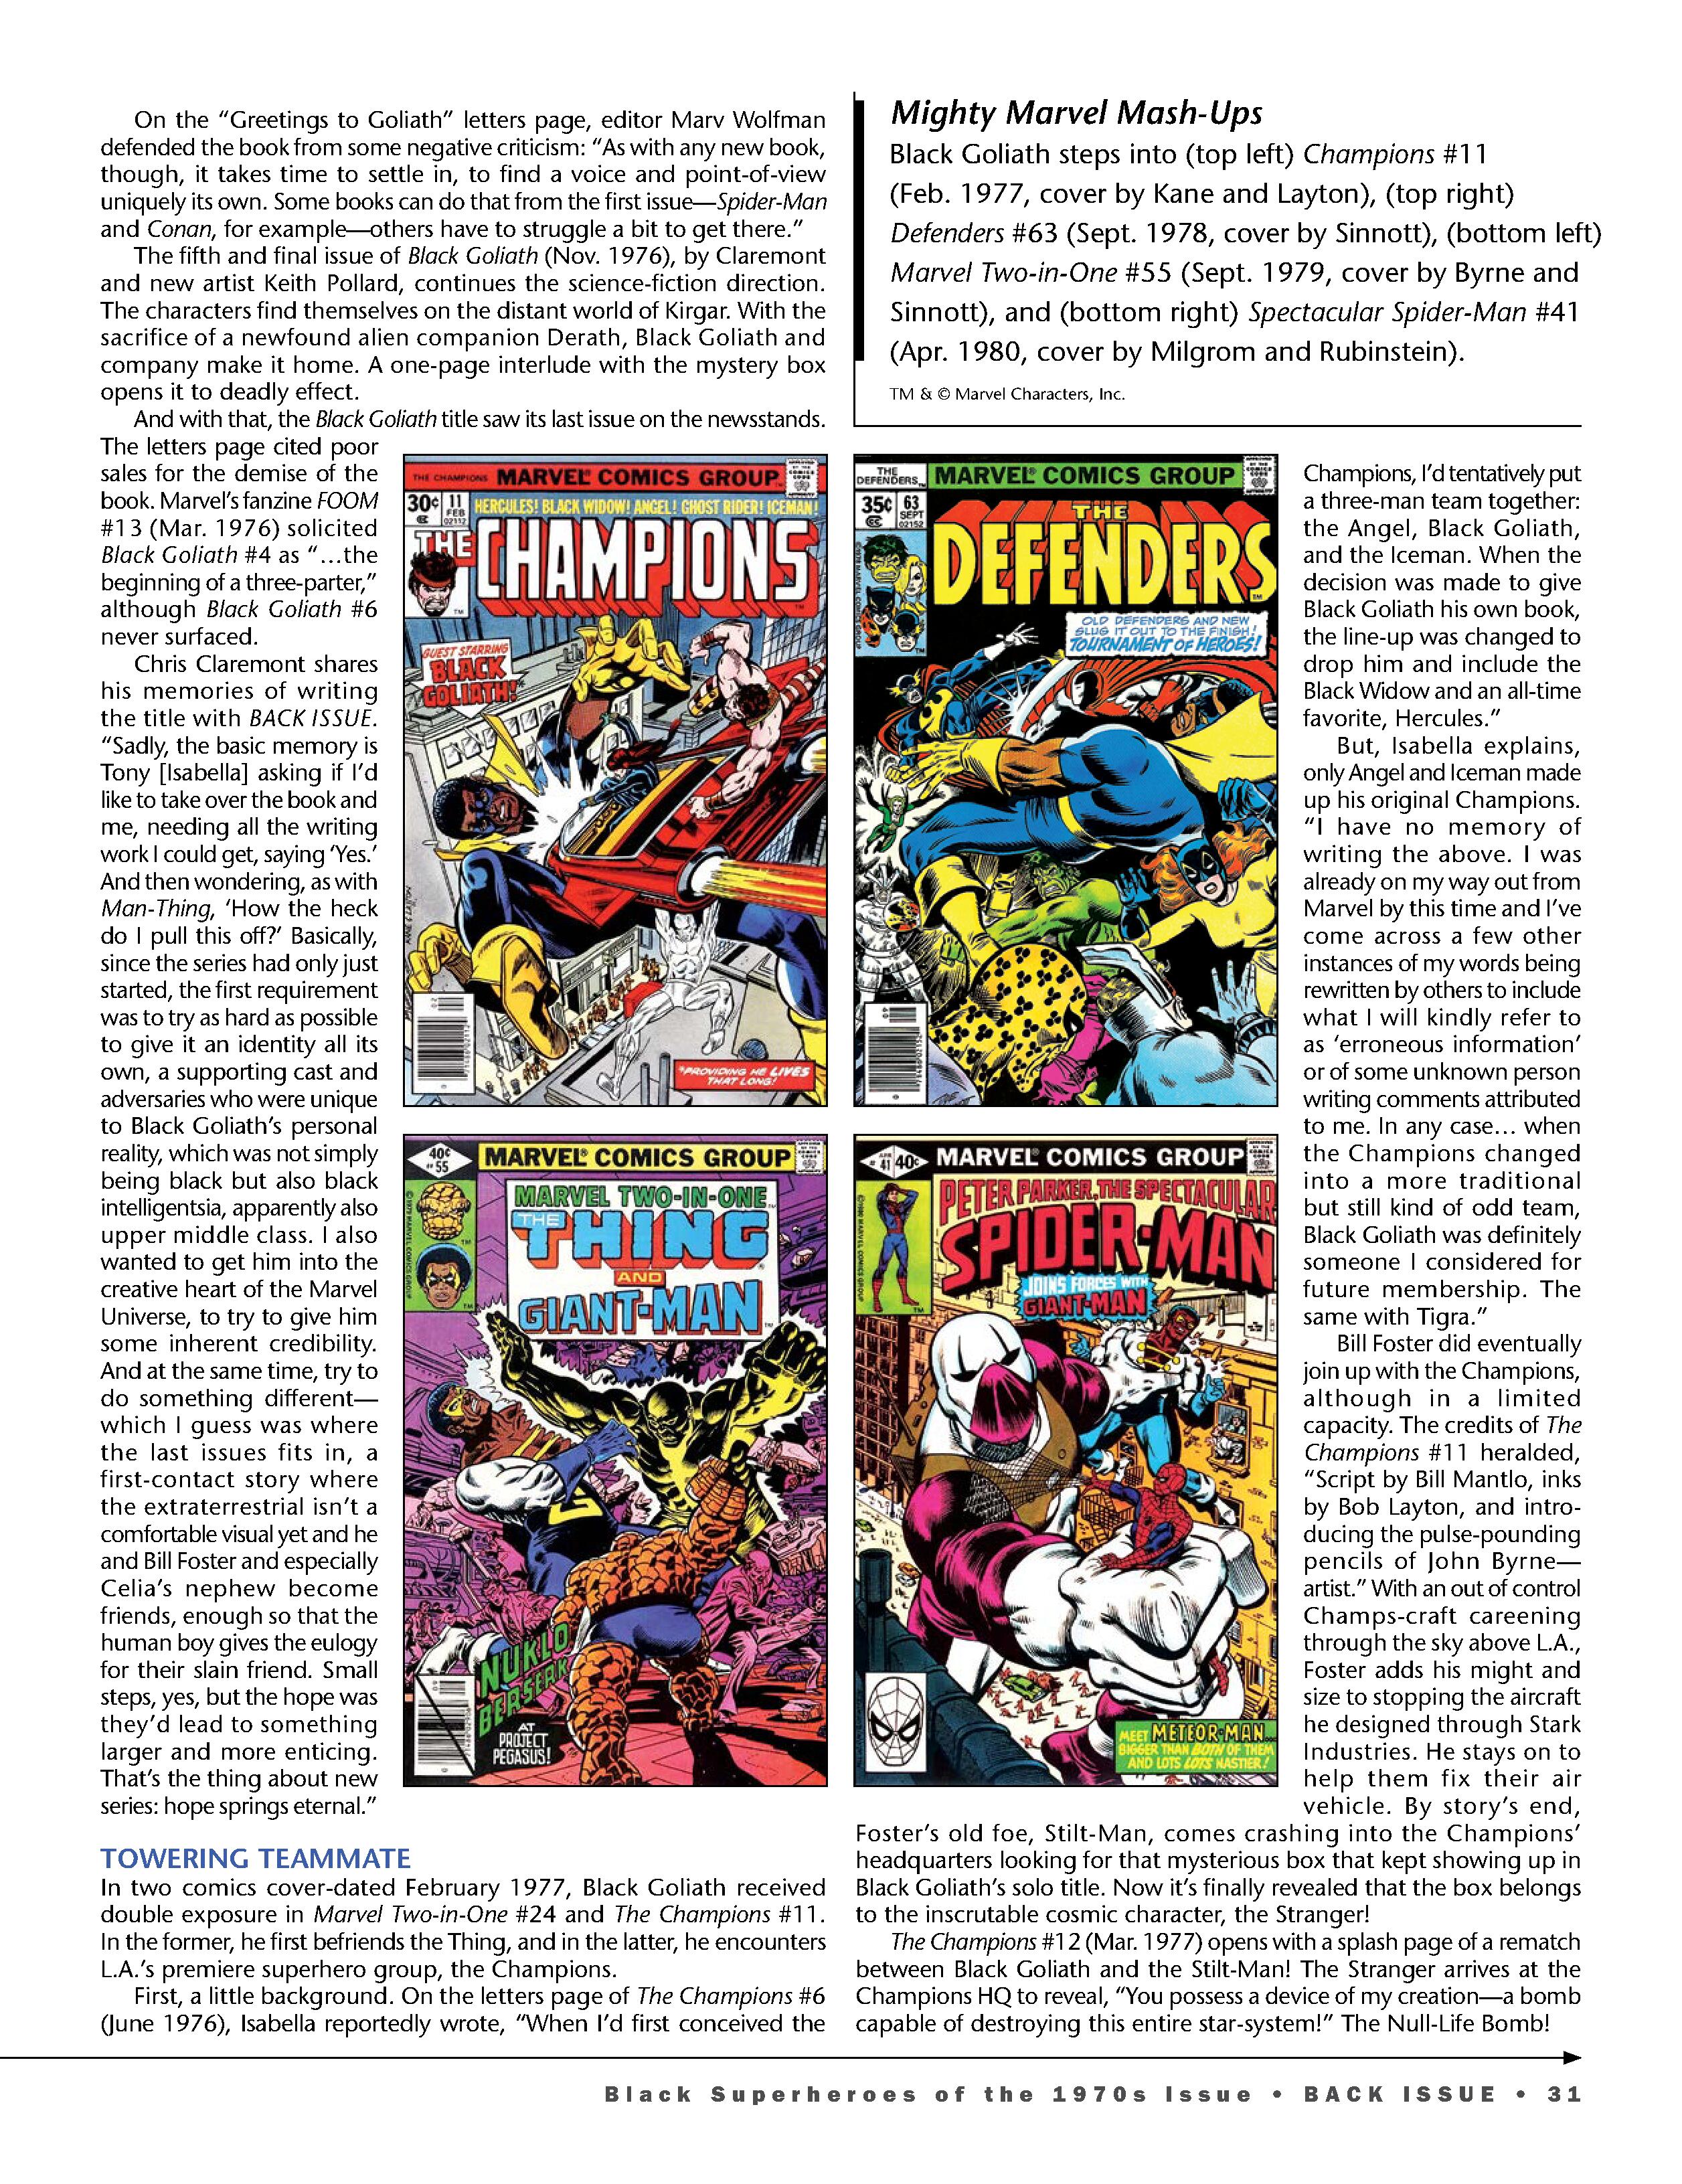 Read online Back Issue comic -  Issue #114 - 33